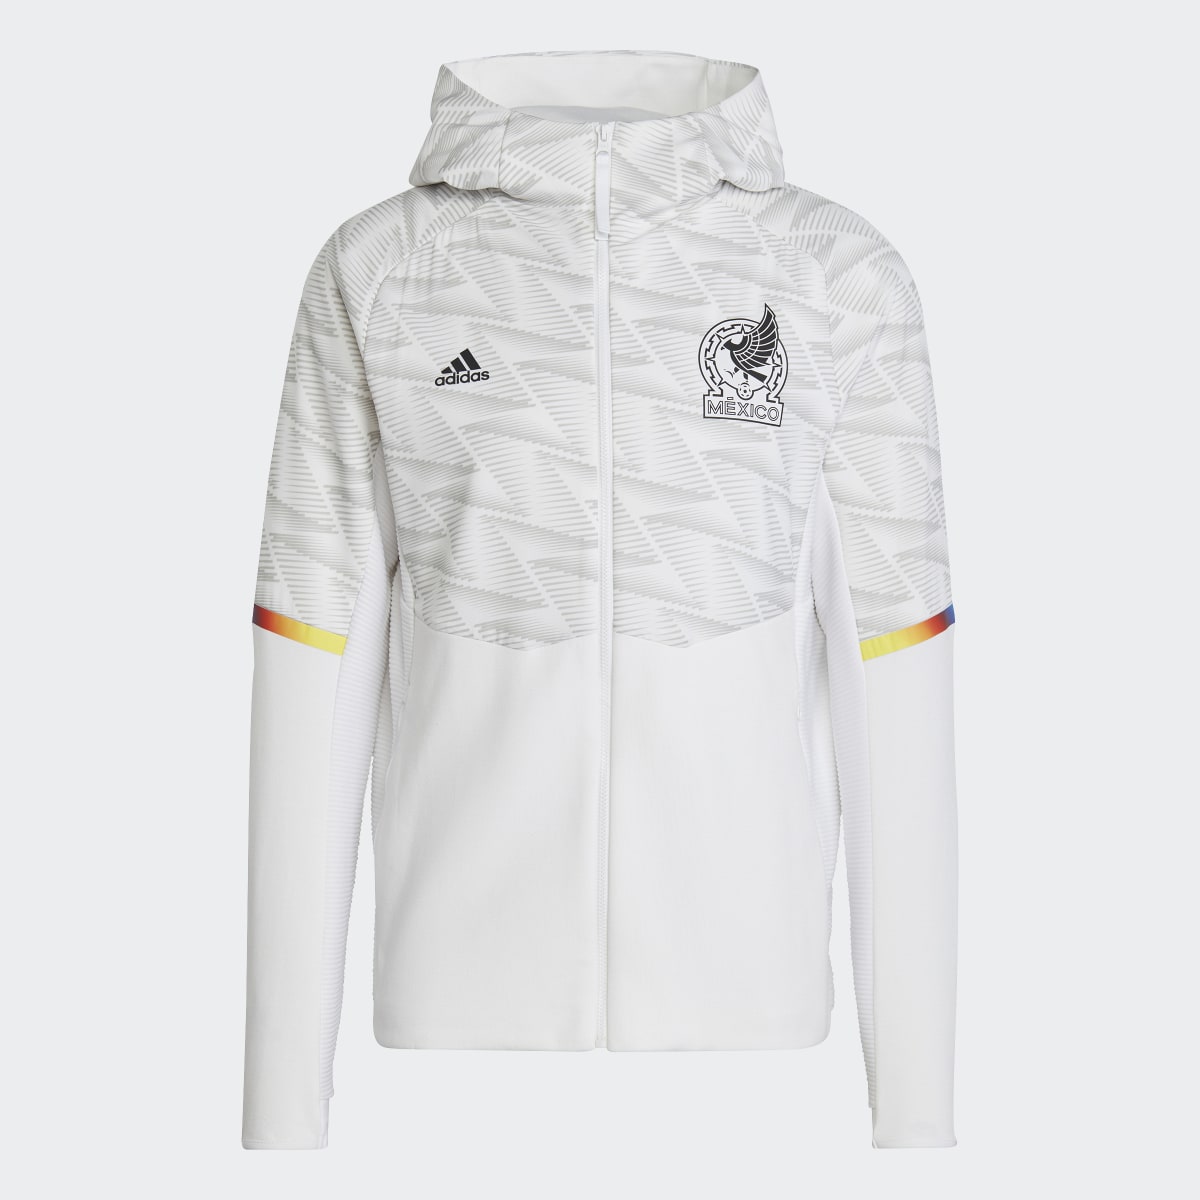 Adidas Mexico Game Day Full-Zip Travel Hoodie. 5